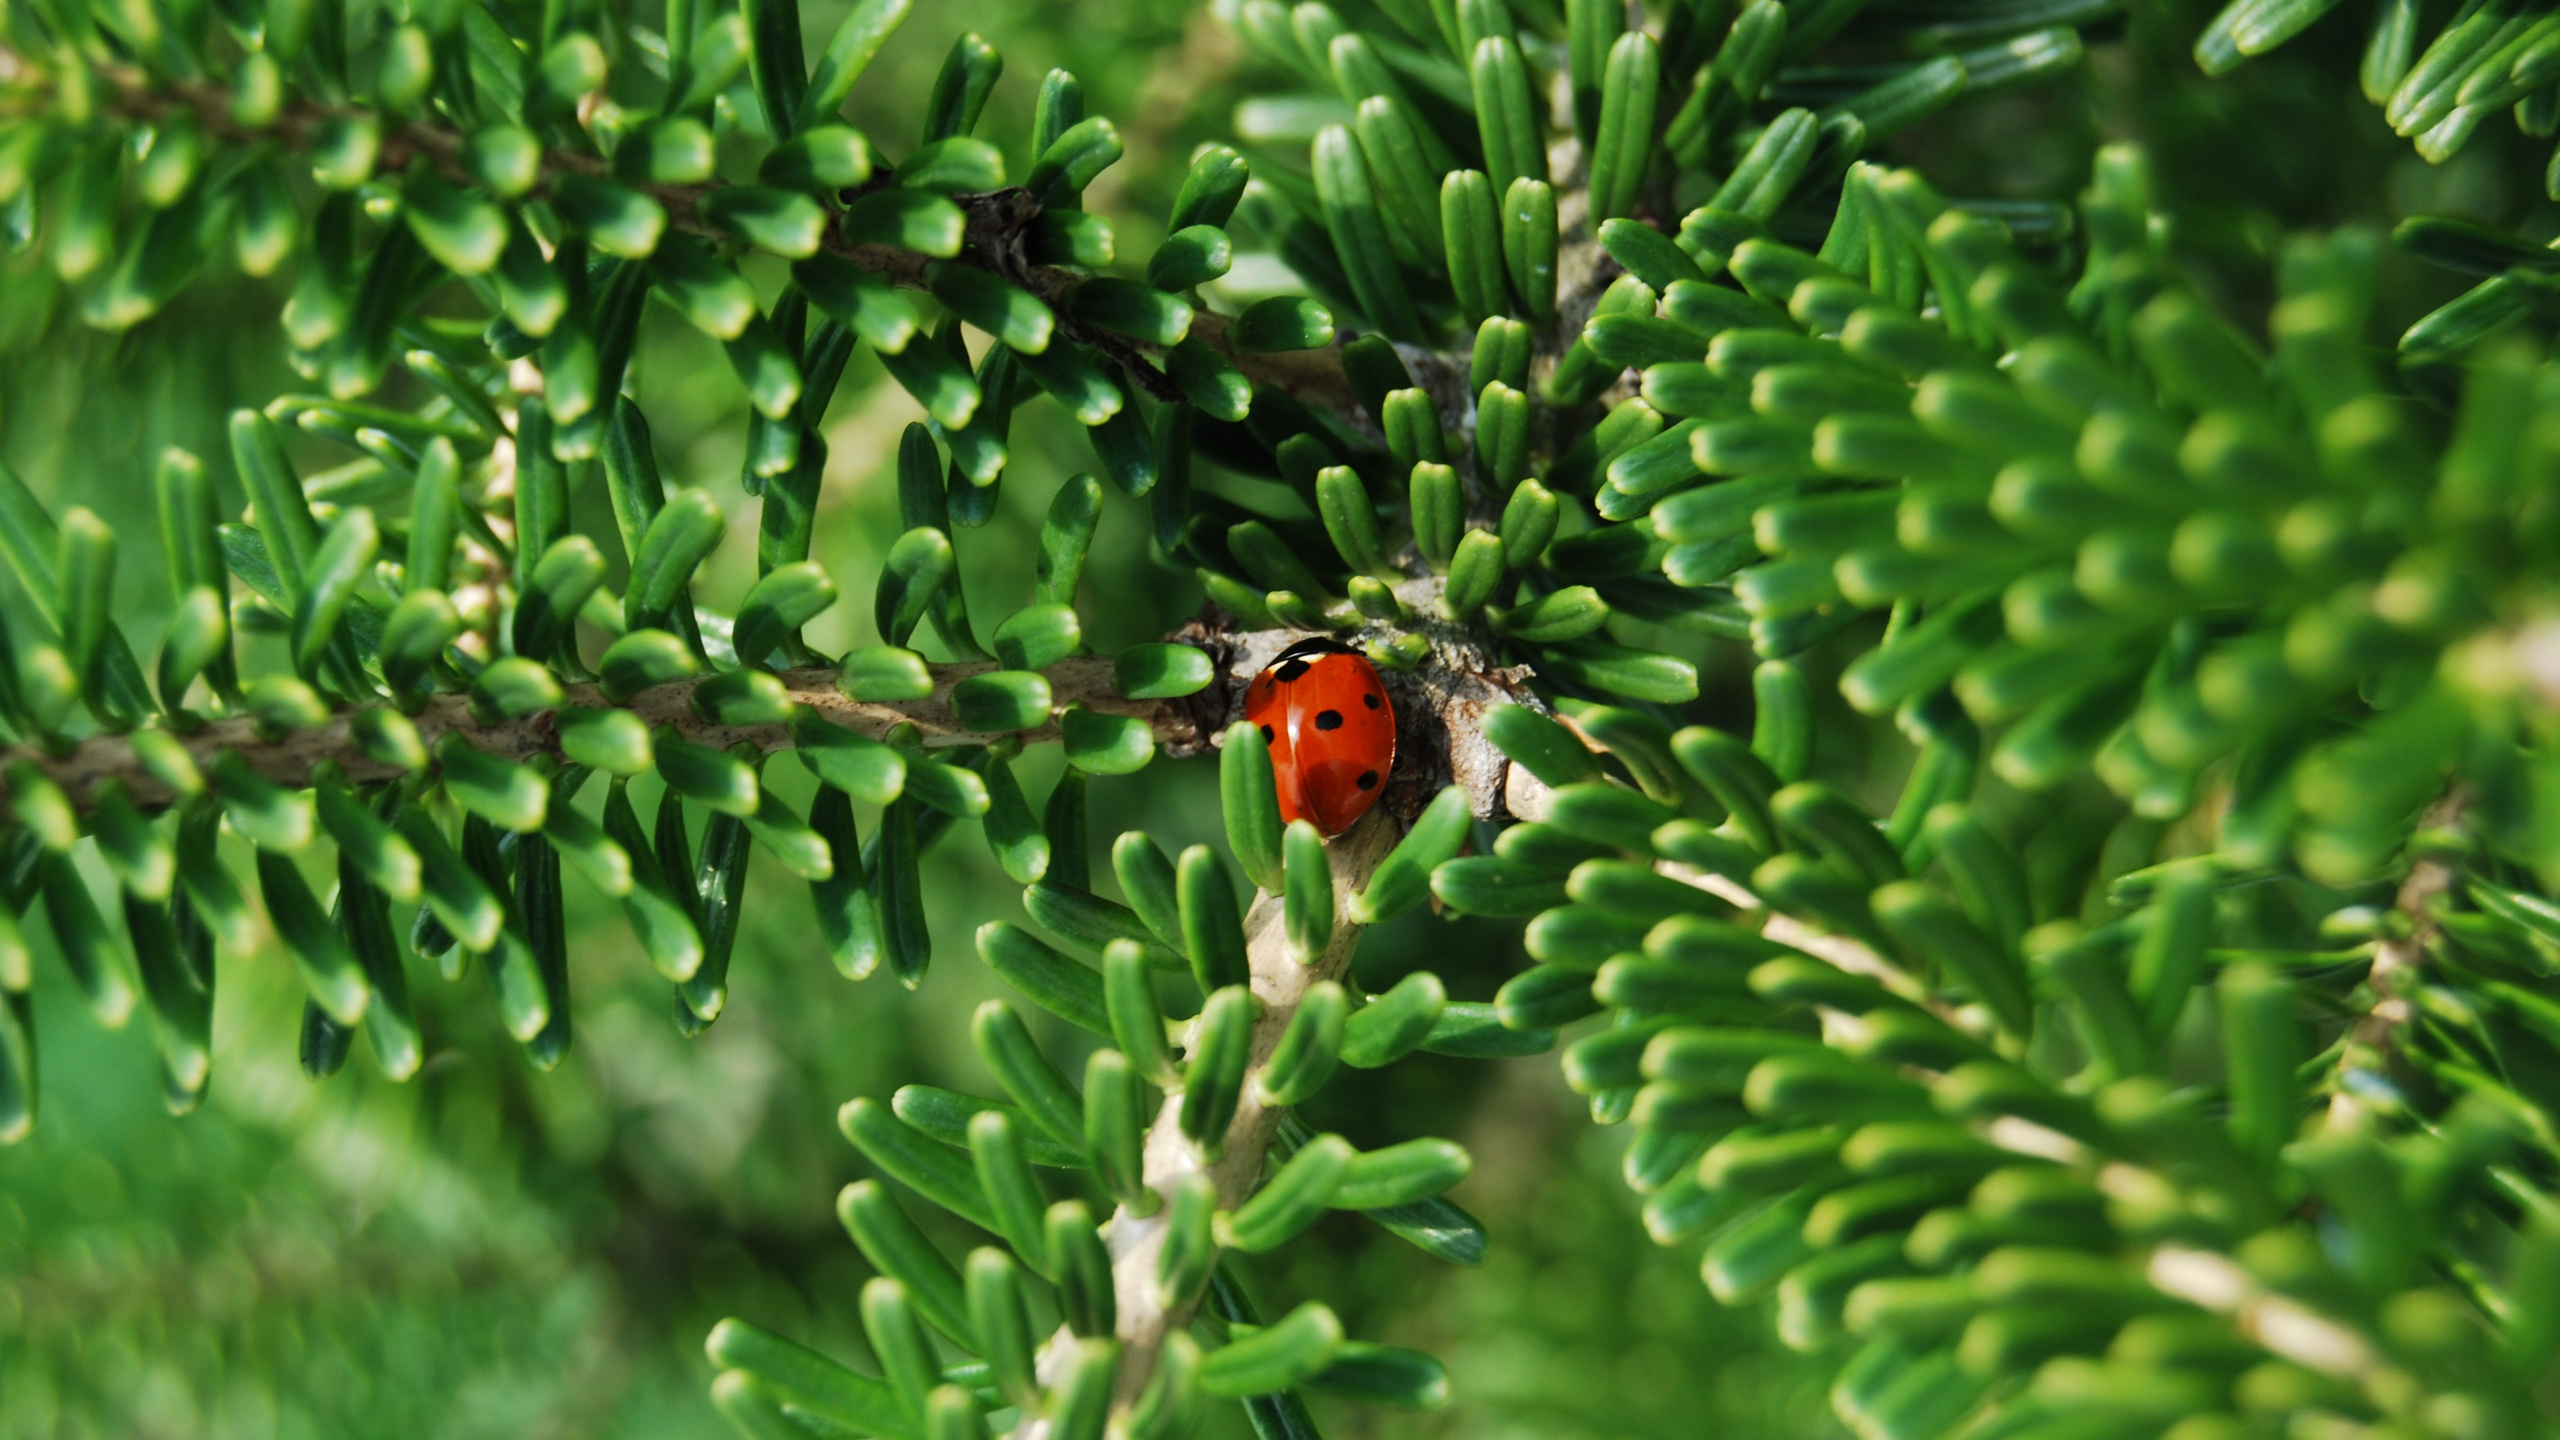 Red and Black Ladybug on Green Plant During Daytime. Wallpaper in 2560x1440 Resolution